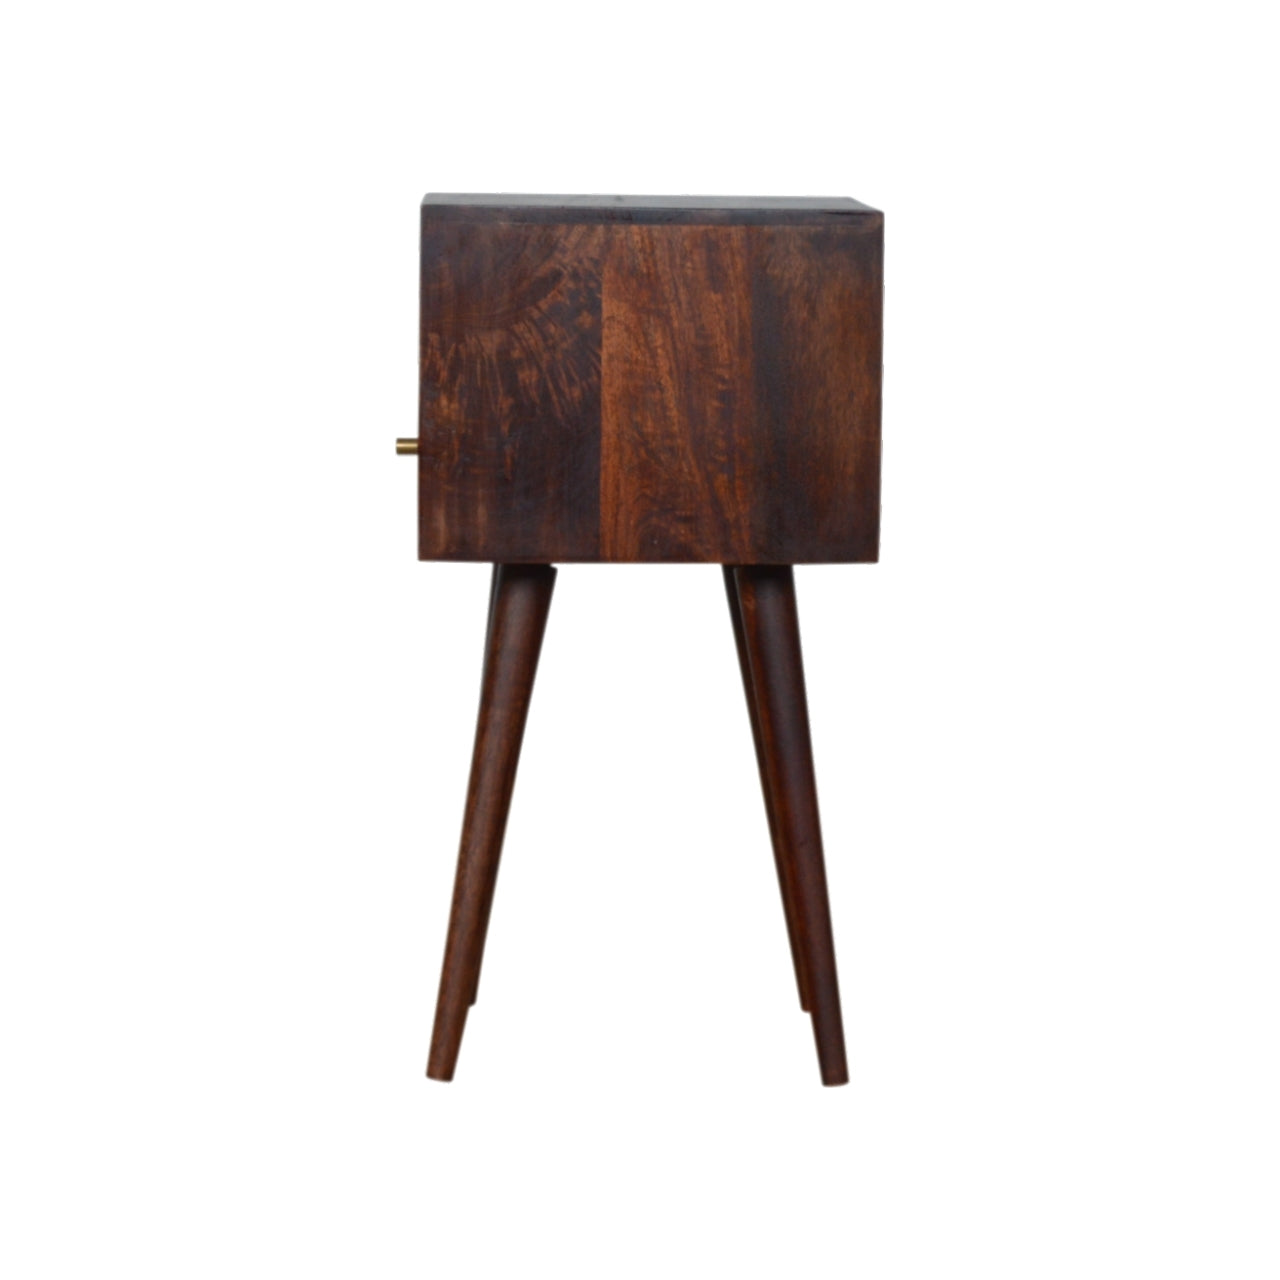 Camryn Bedside Table, Timeless Petite Solid Cherry Chestnut - Broxle